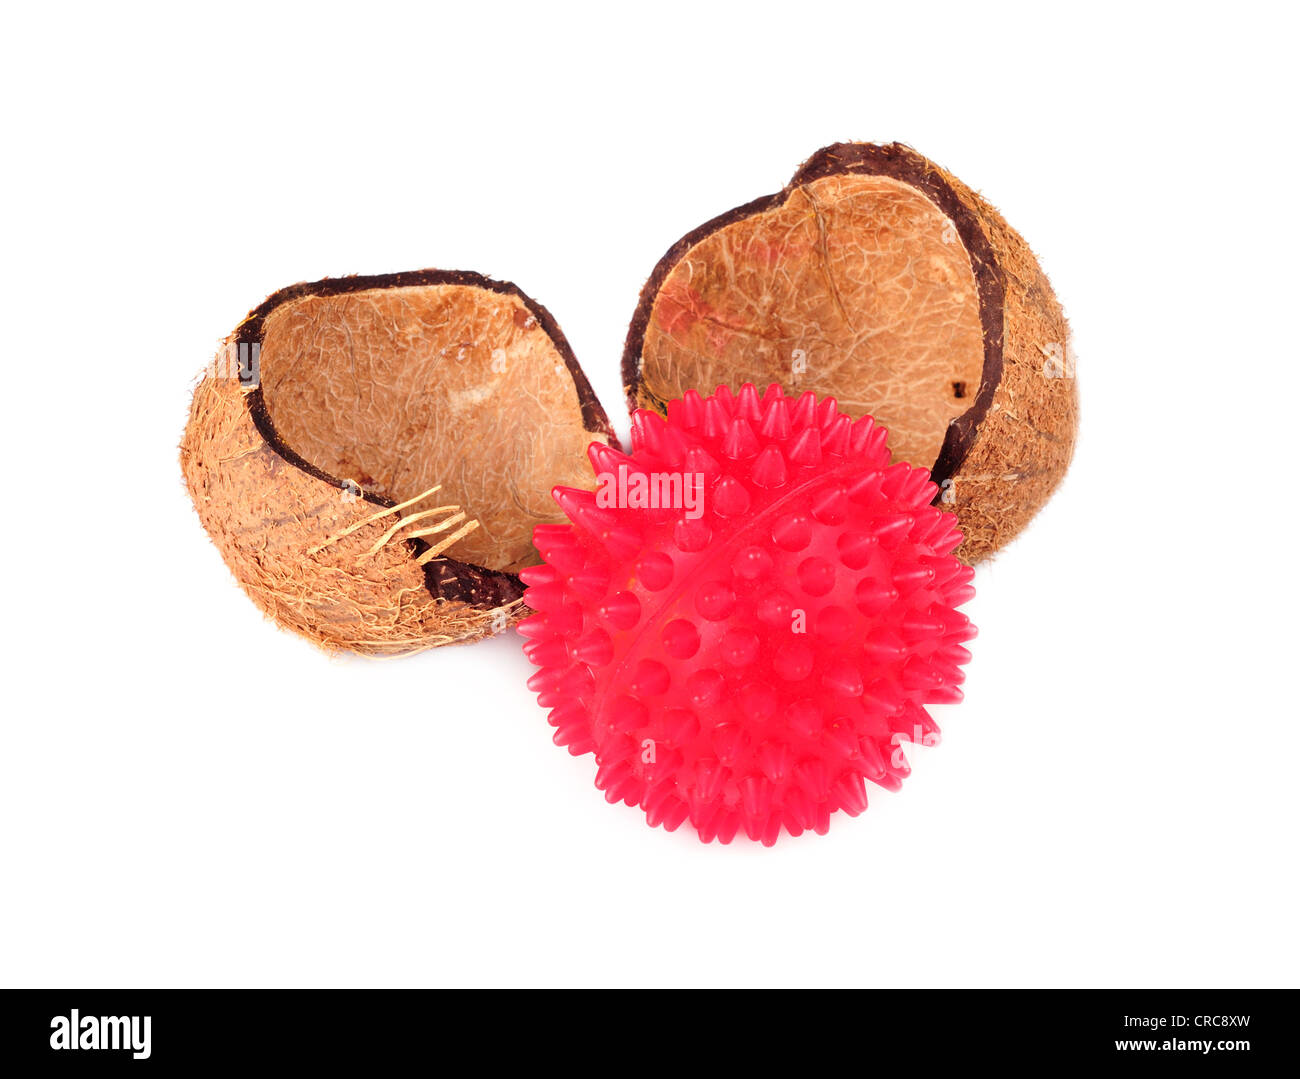 Coconut shells with red ball isolatet on a white backround Stock Photo